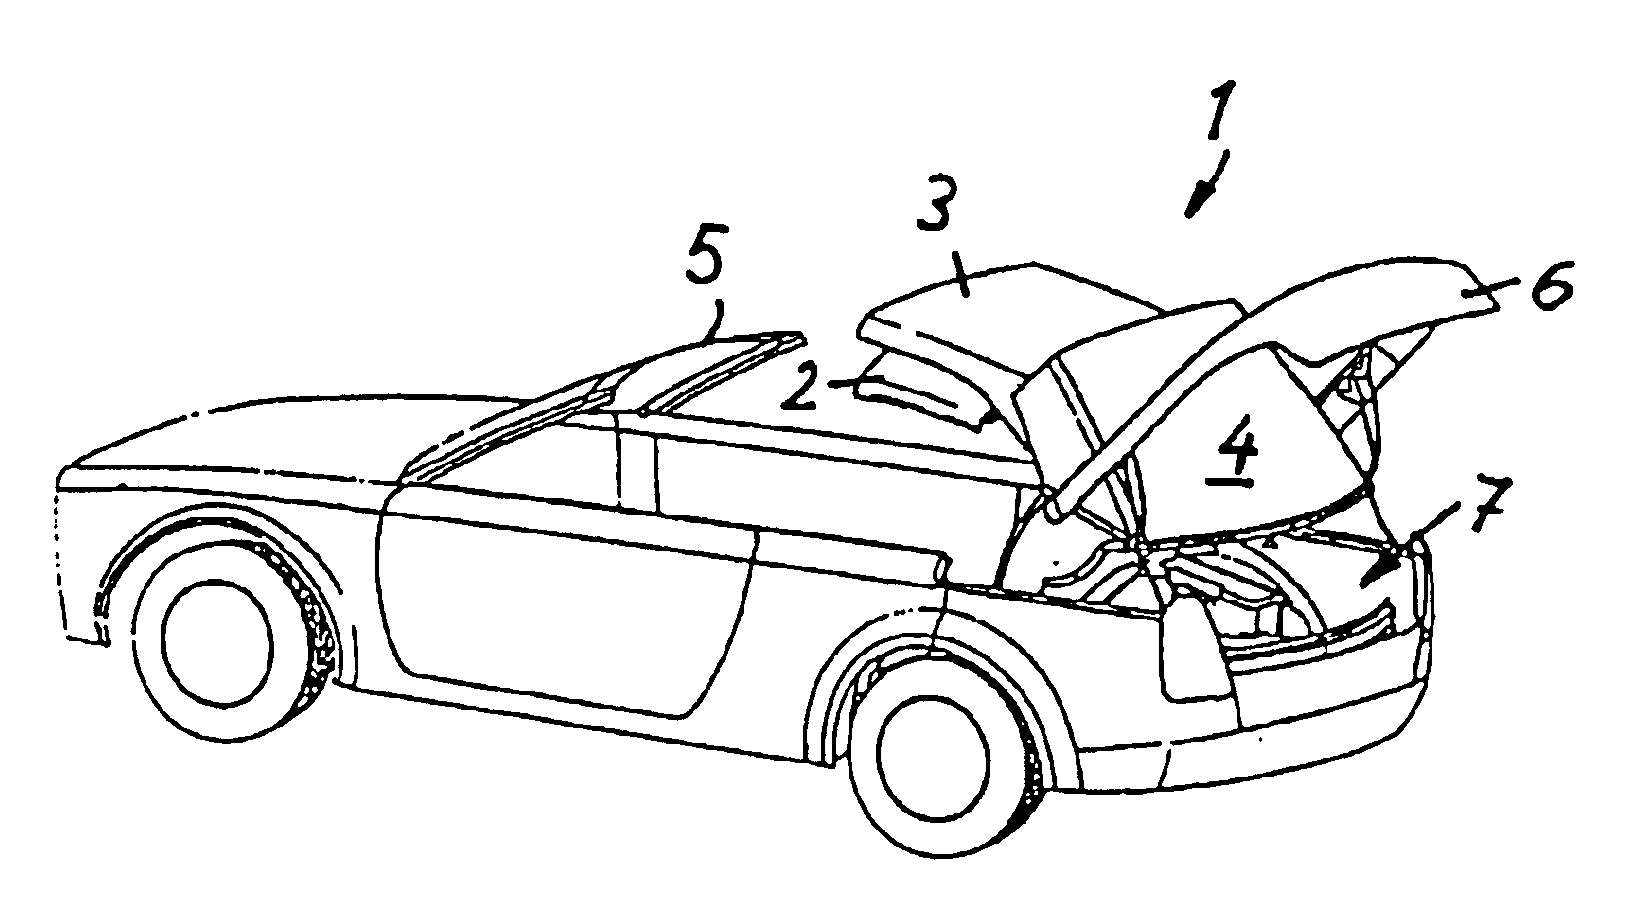 Hardtop vehicle roof with at least two rigid roof parts